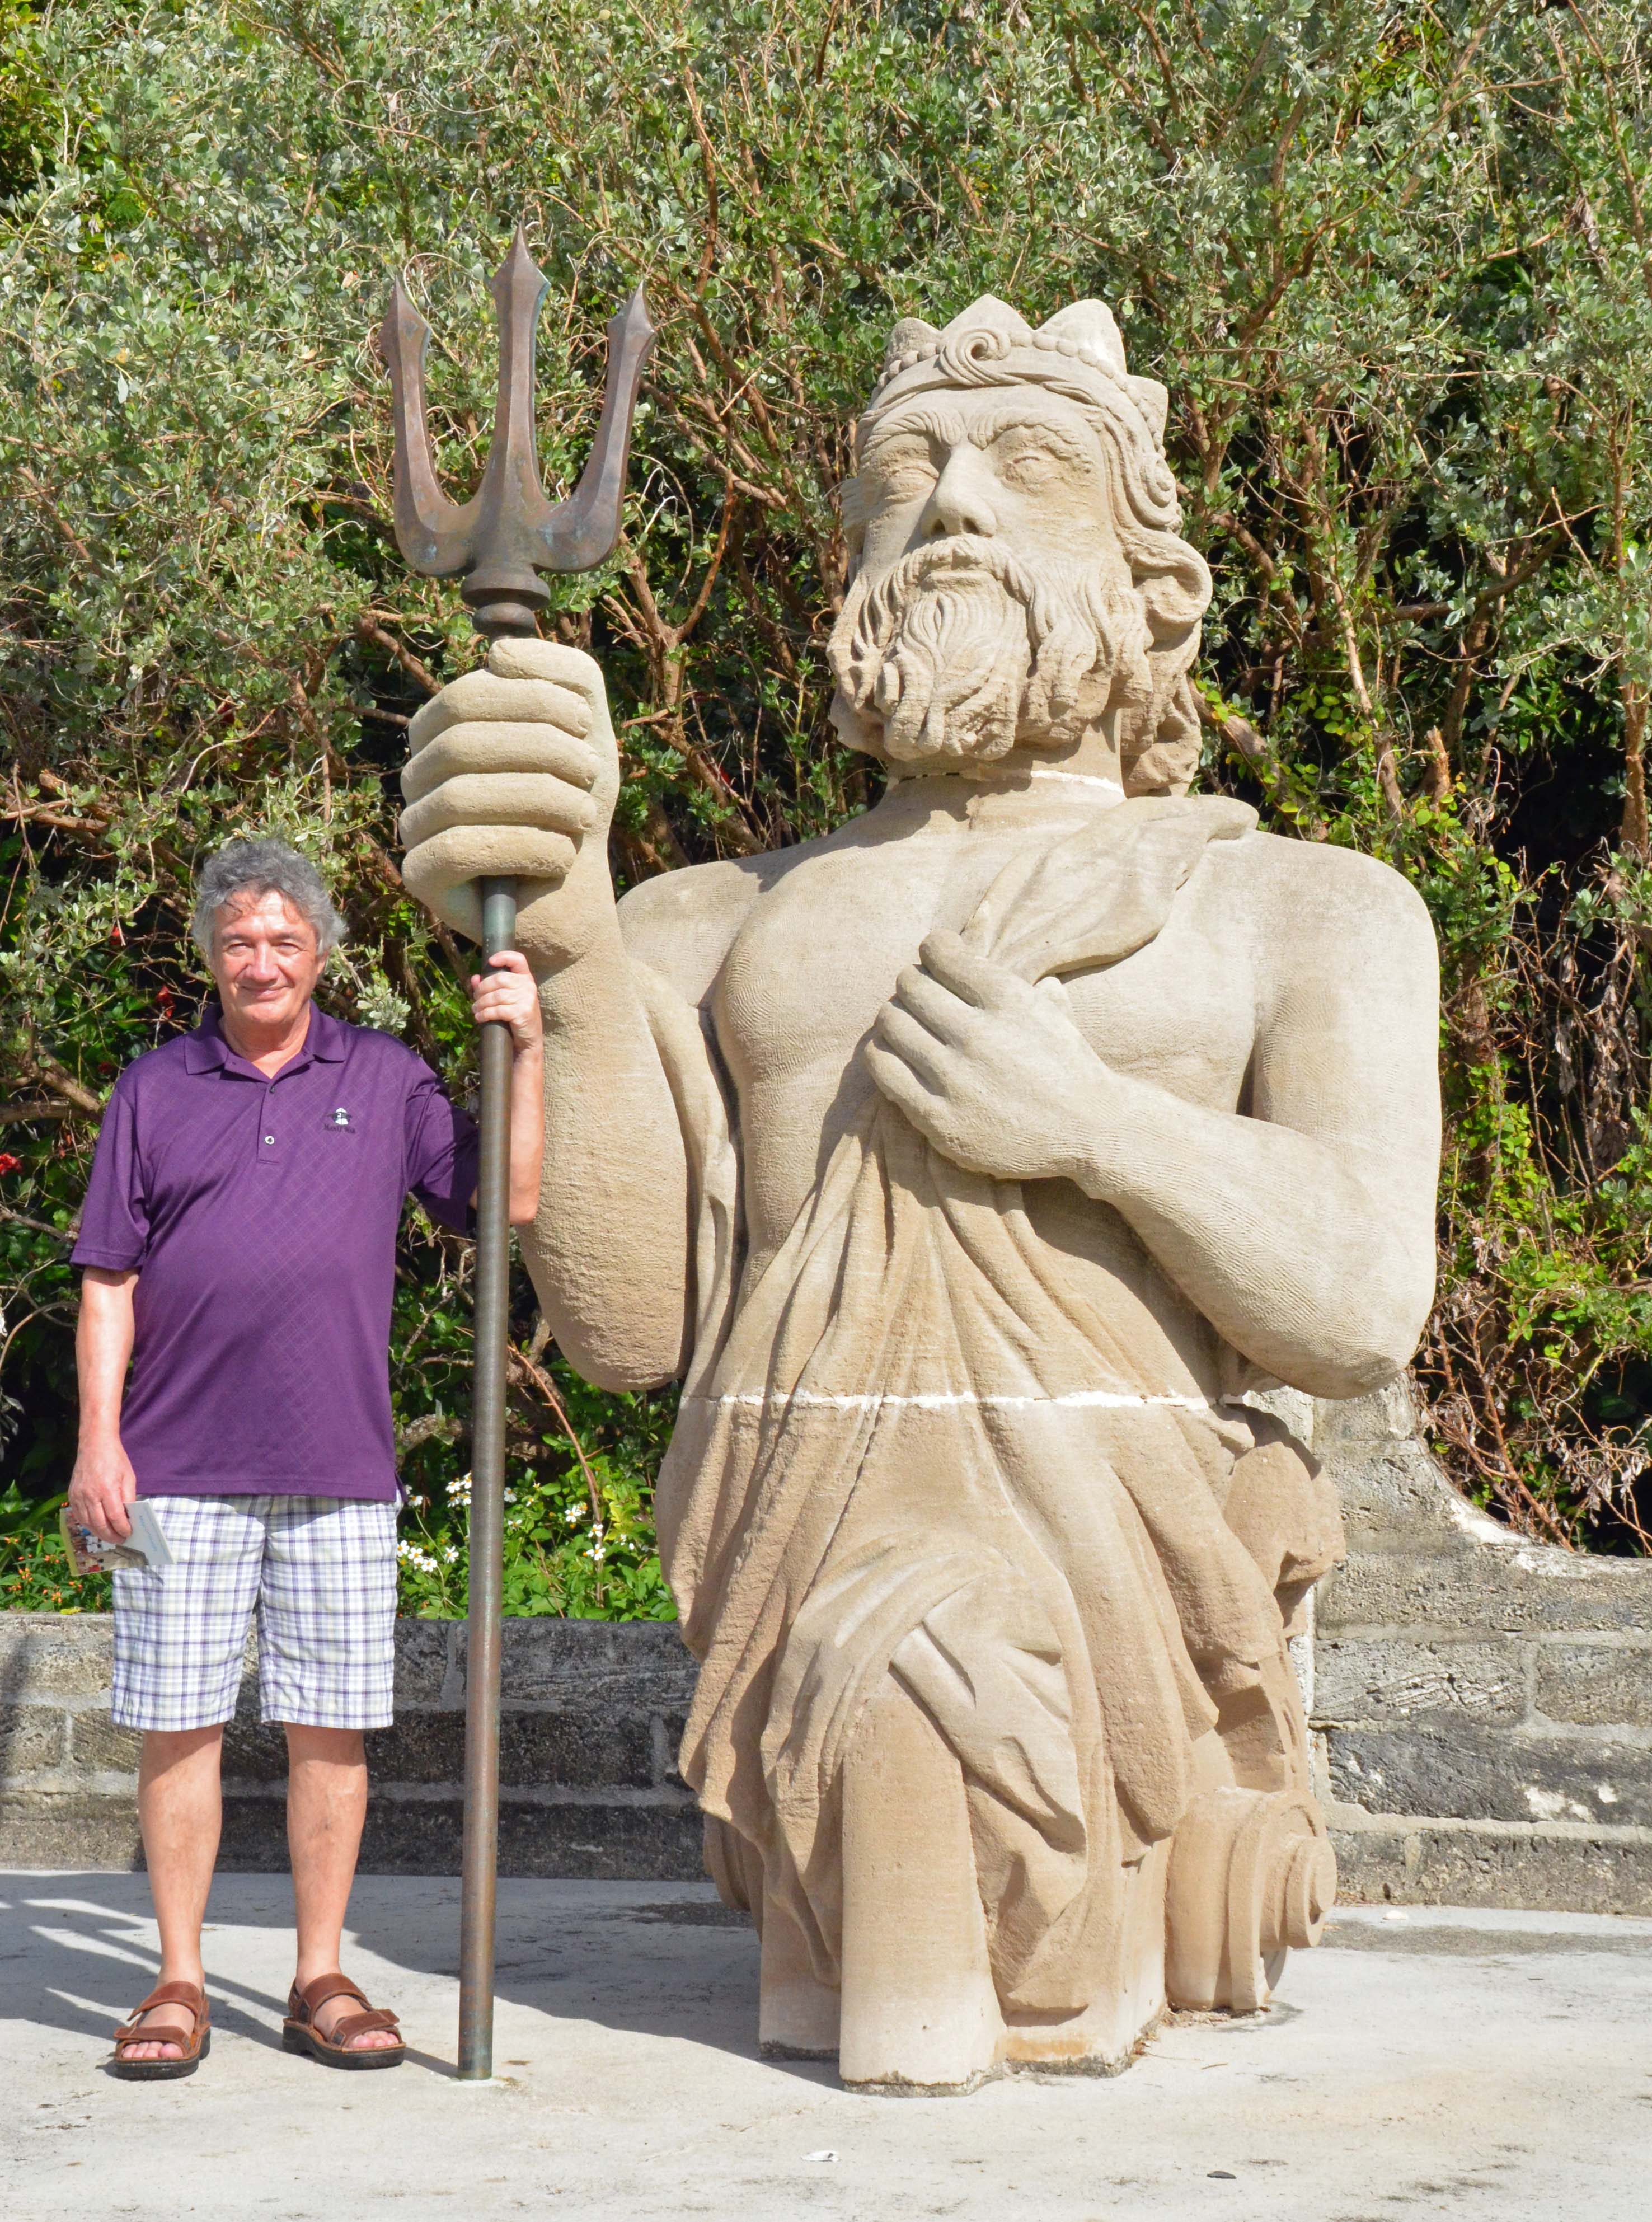 With King Neptune